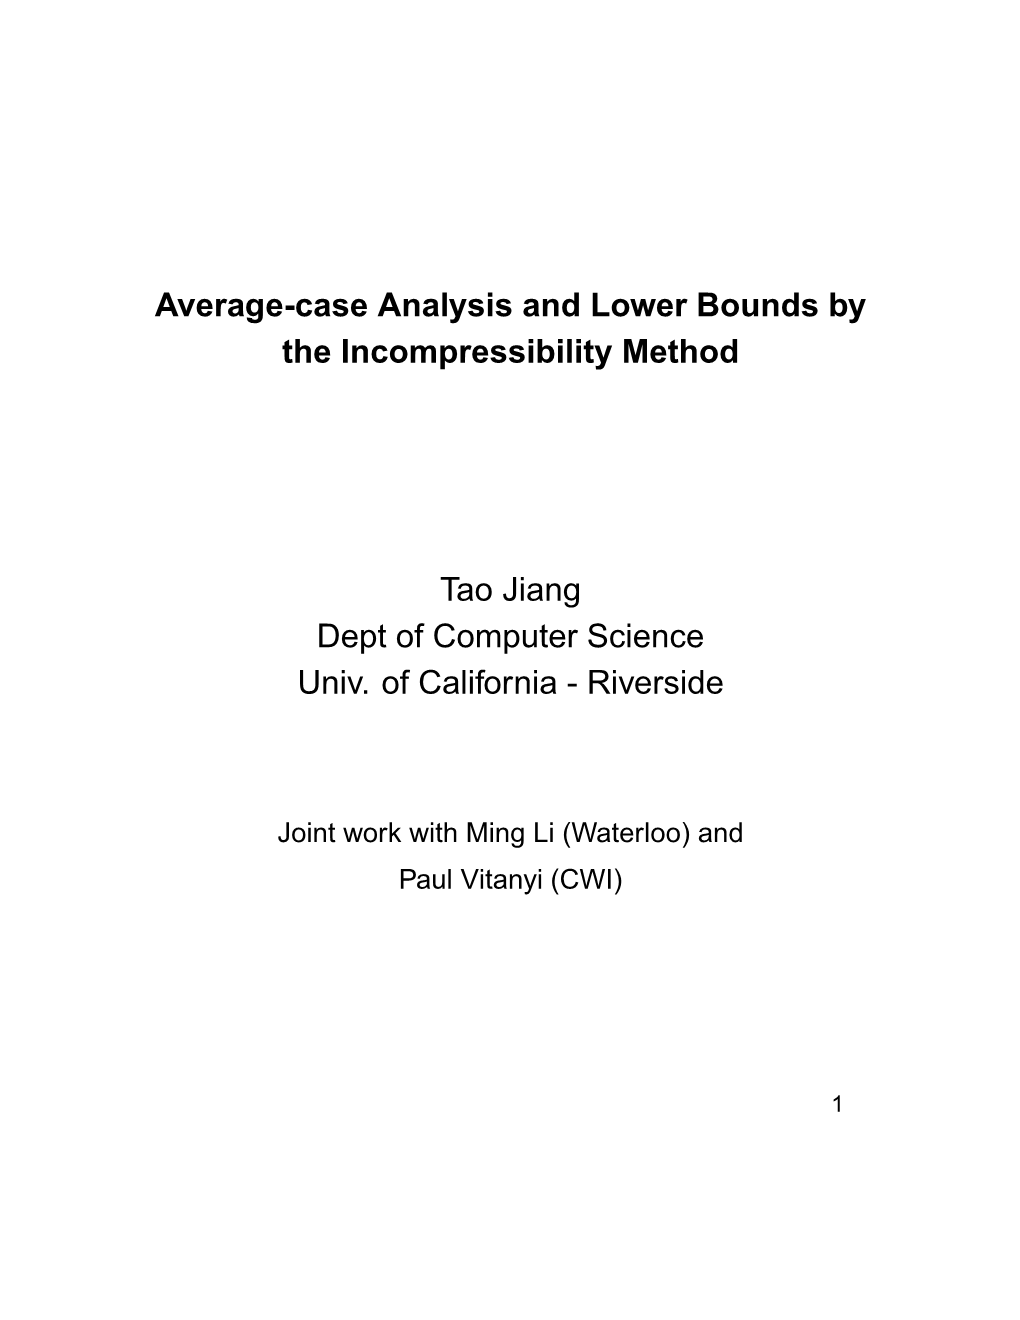 Average-Case Analysis and Lower Bounds by the Incompressibility Method